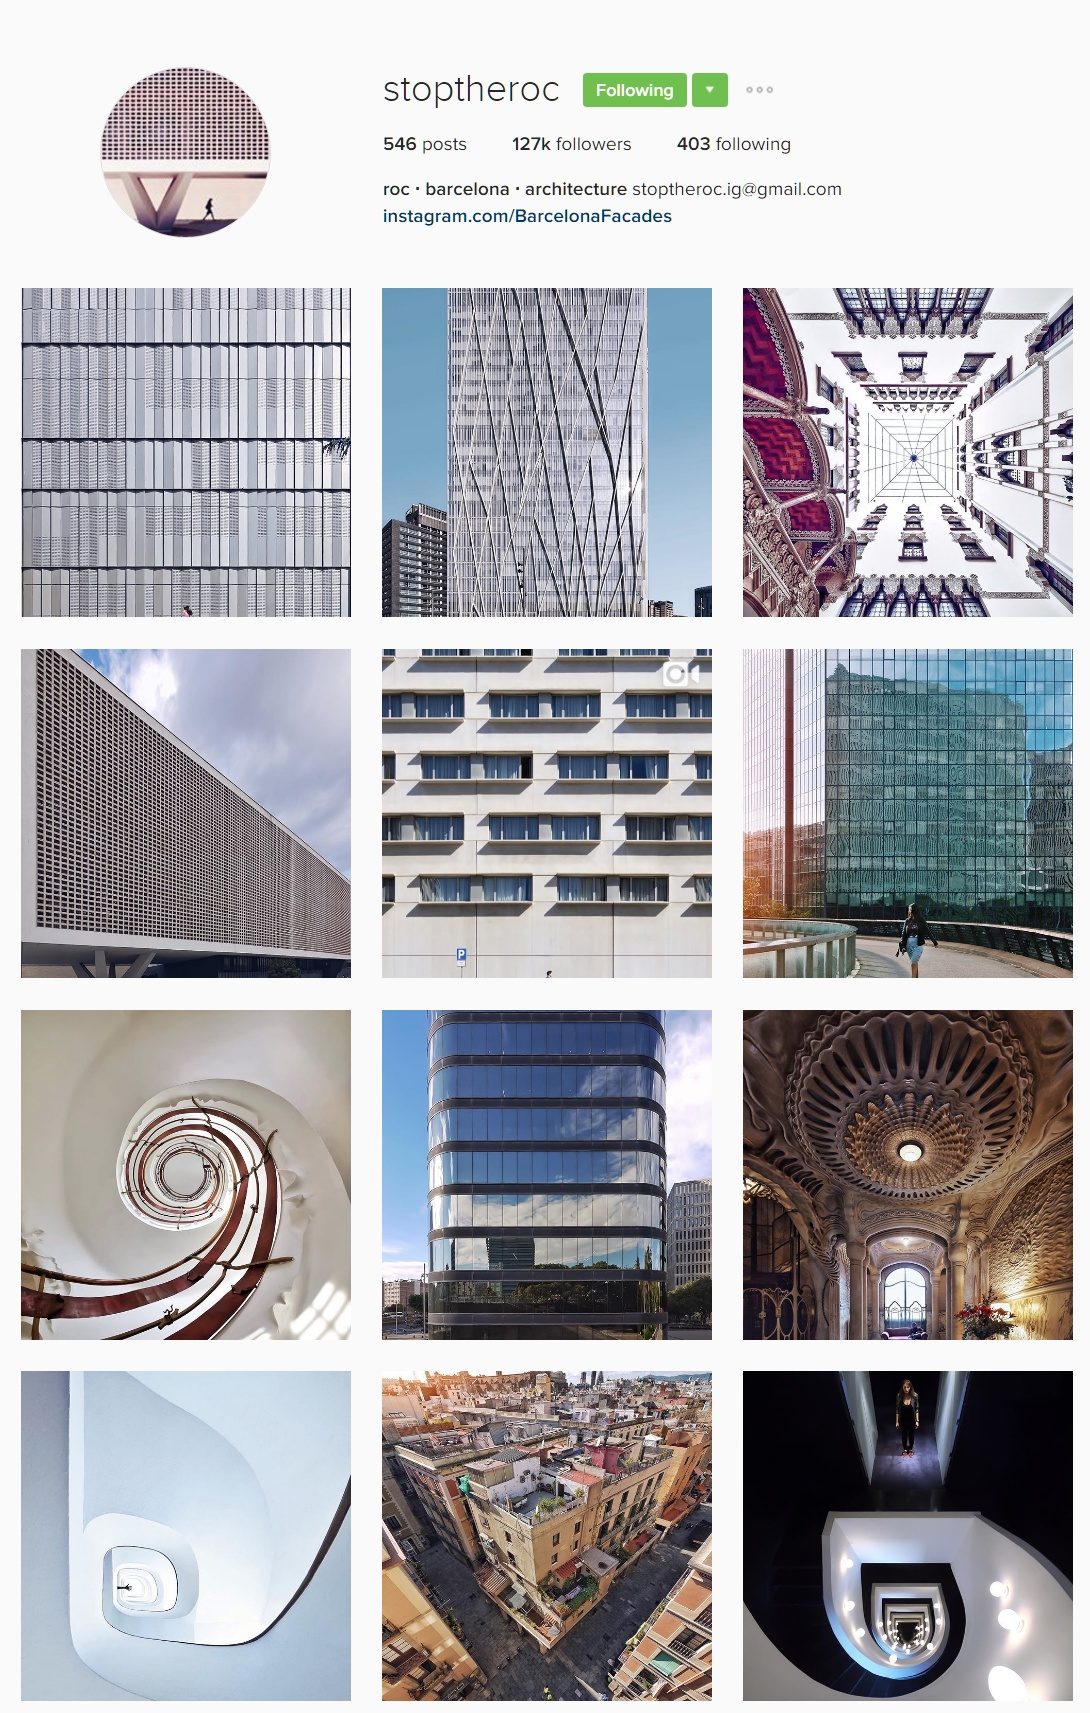 roc-barcelona-architecture-stoptheroc-instagram-photos-and-videos-clipular